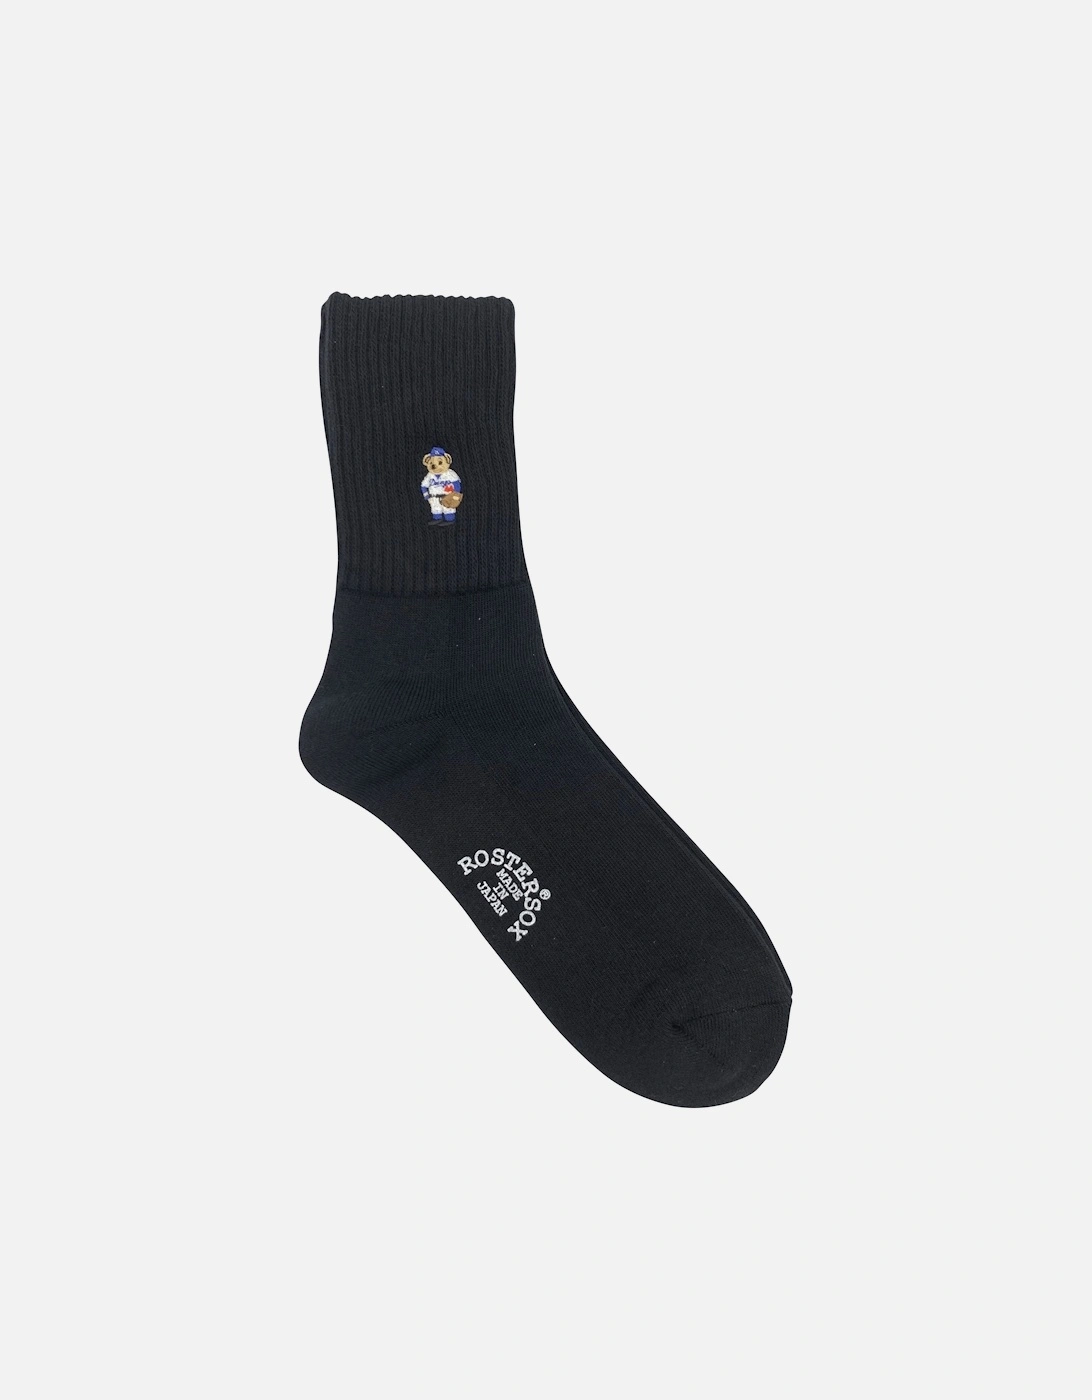 Rostersox's Bear Socks - Black and White, 3 of 2